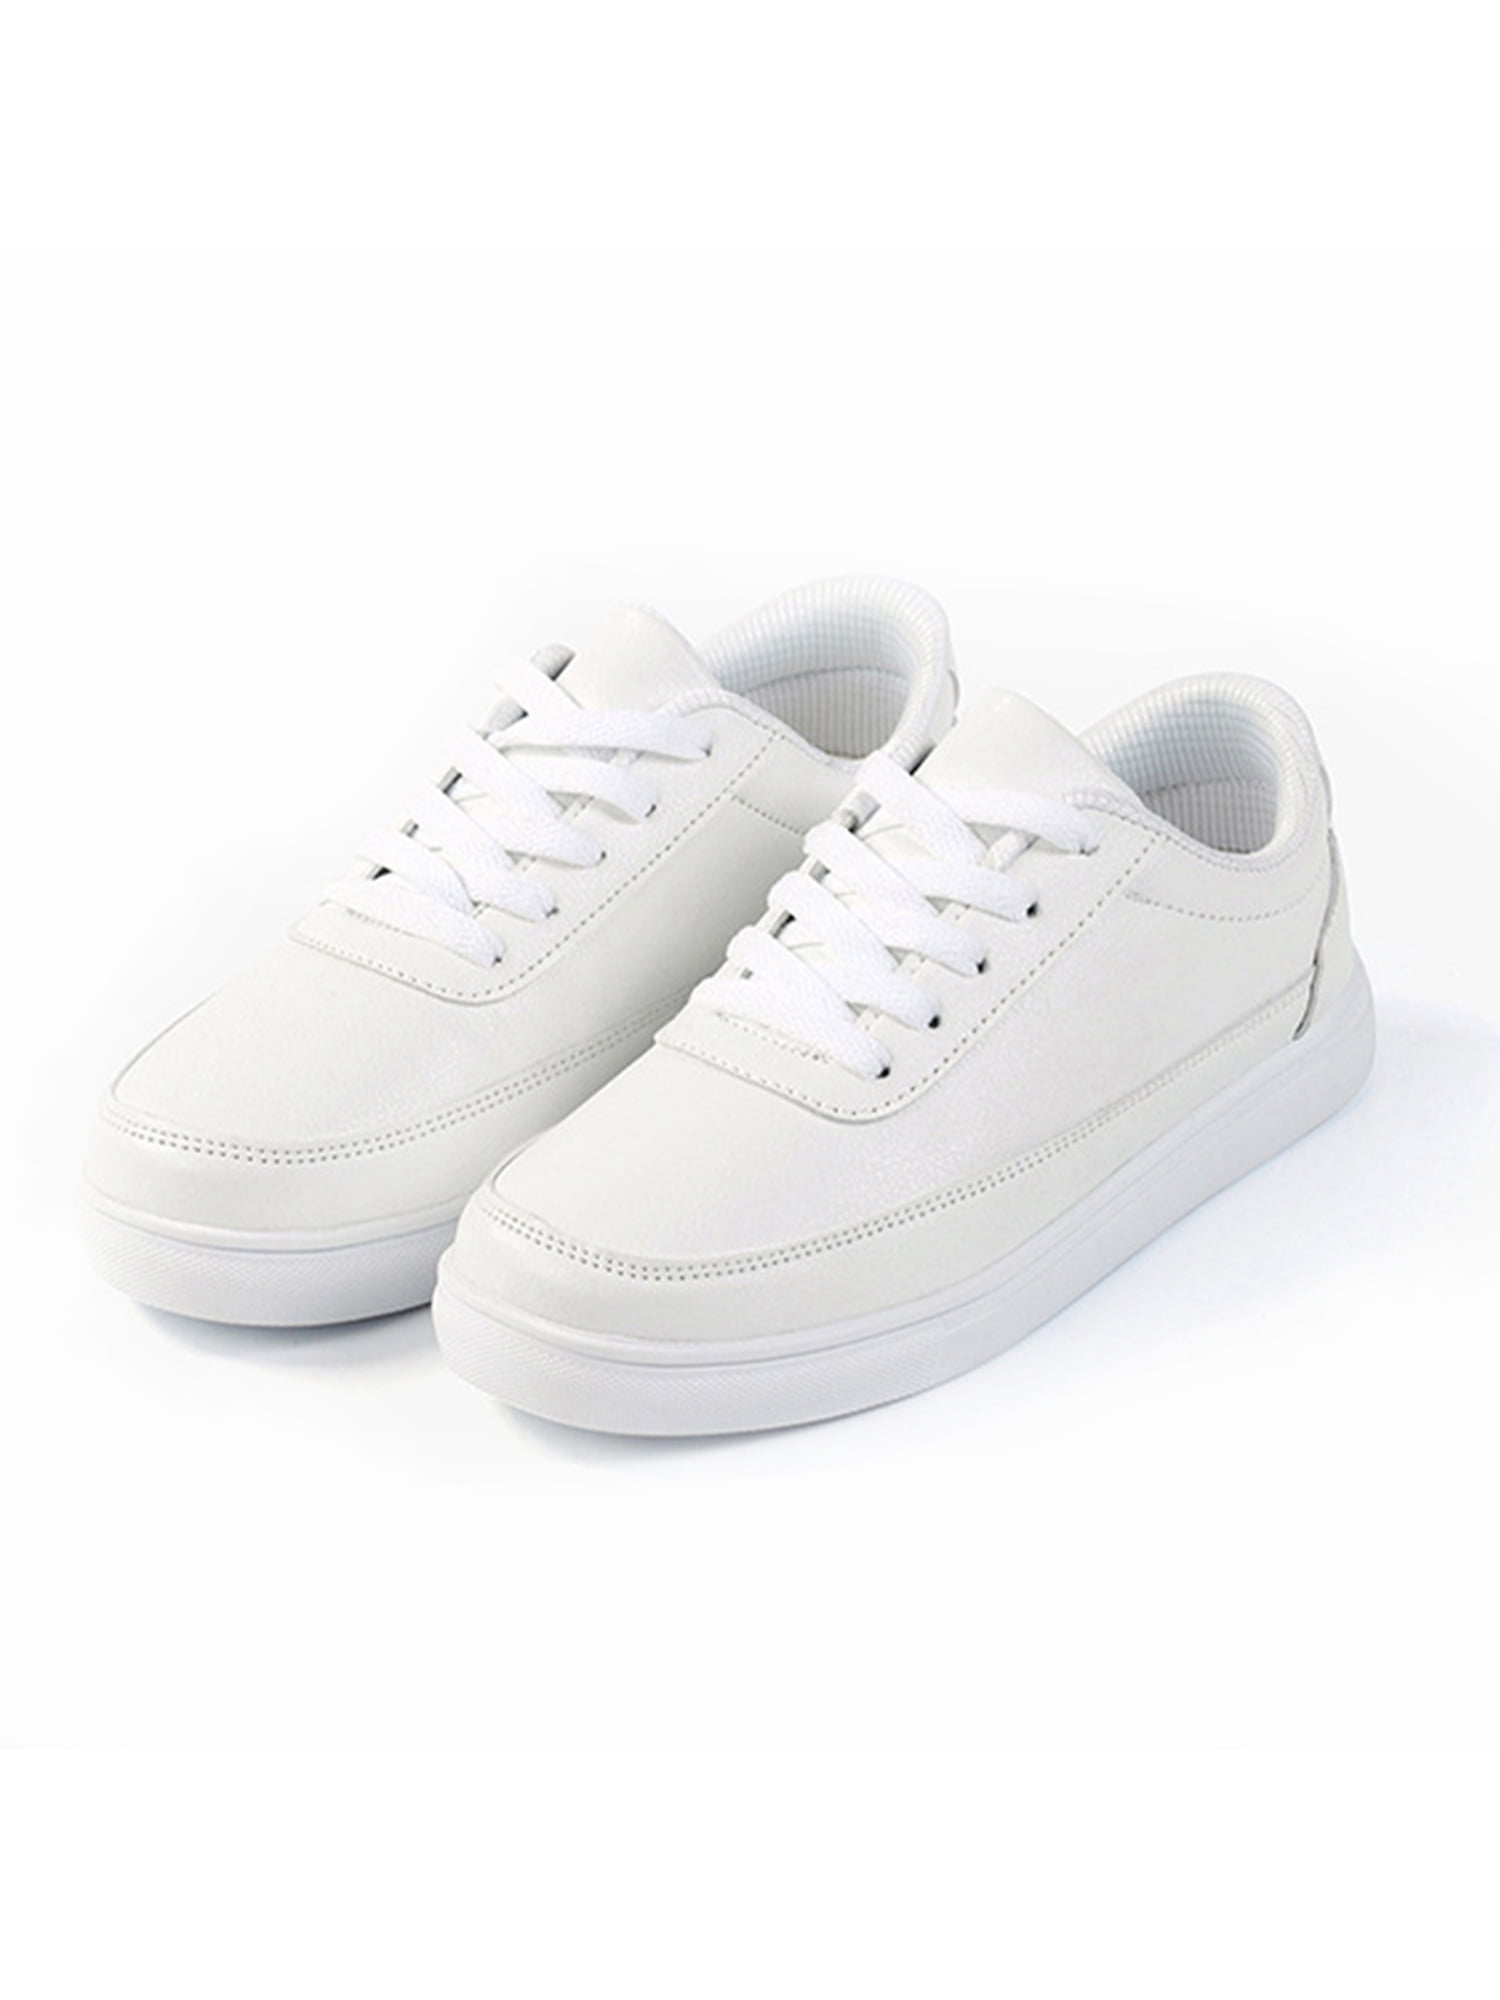 Premium AI Image | White sneakers isolated on a white background-megaelearning.vn